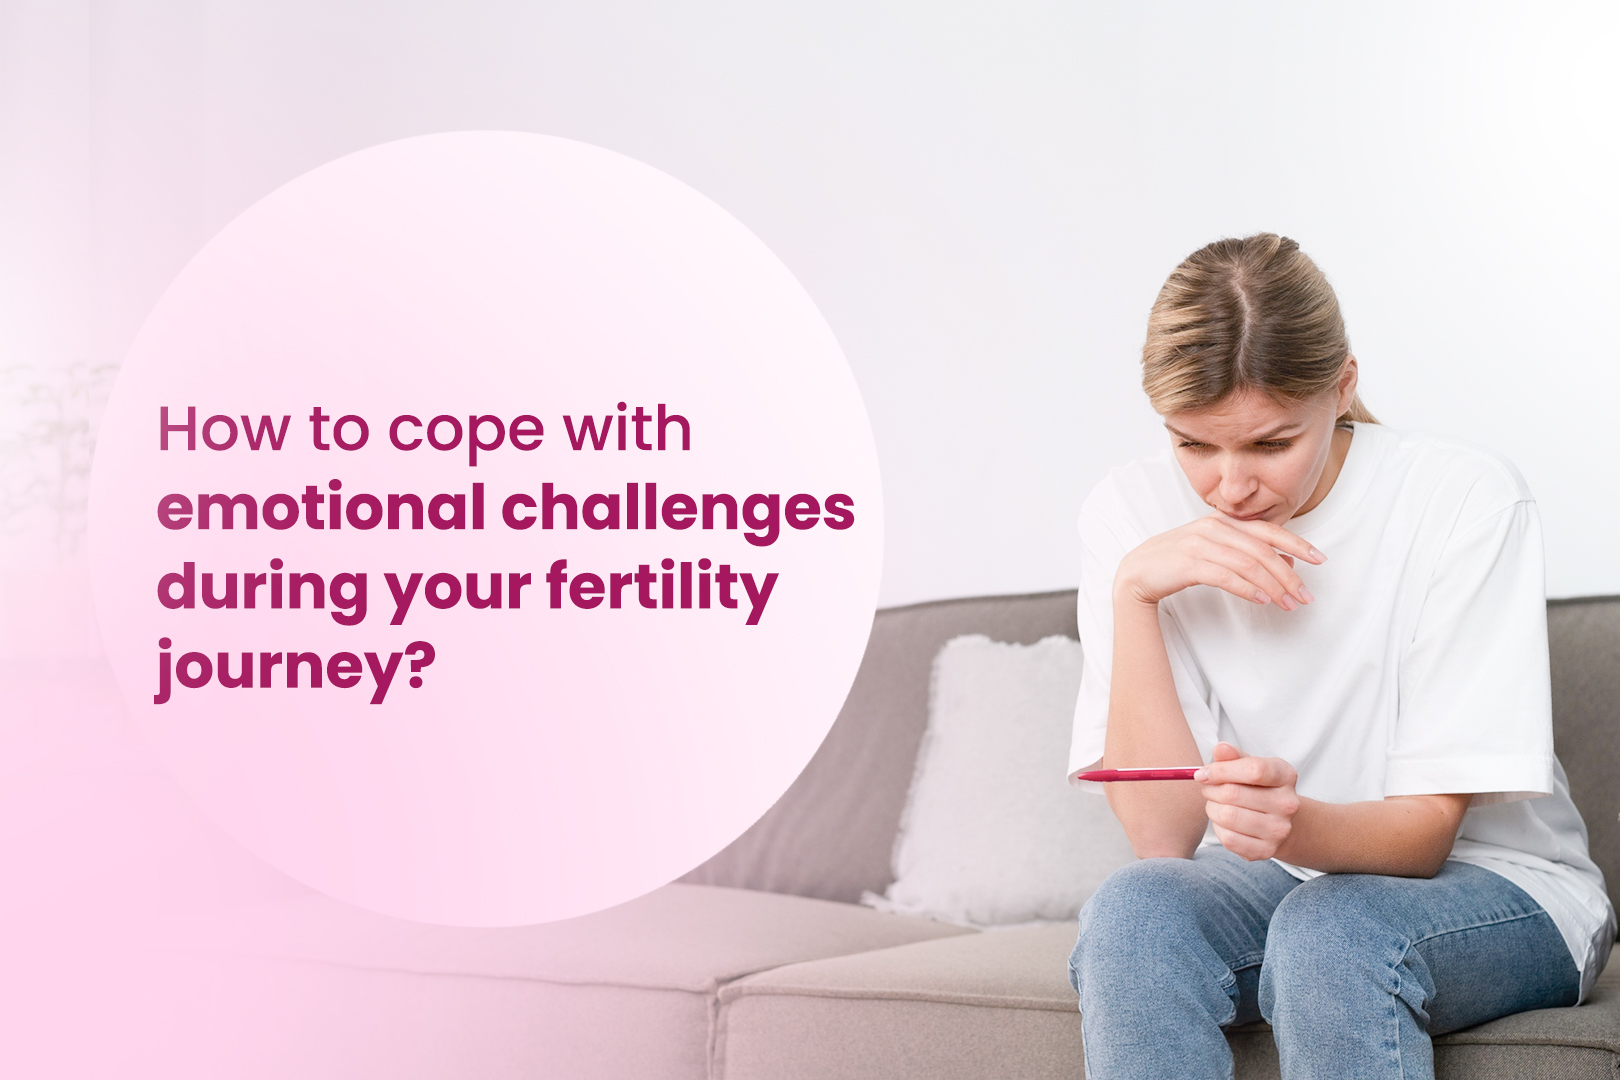 How to cope with emotional challenges during your fertility journey?